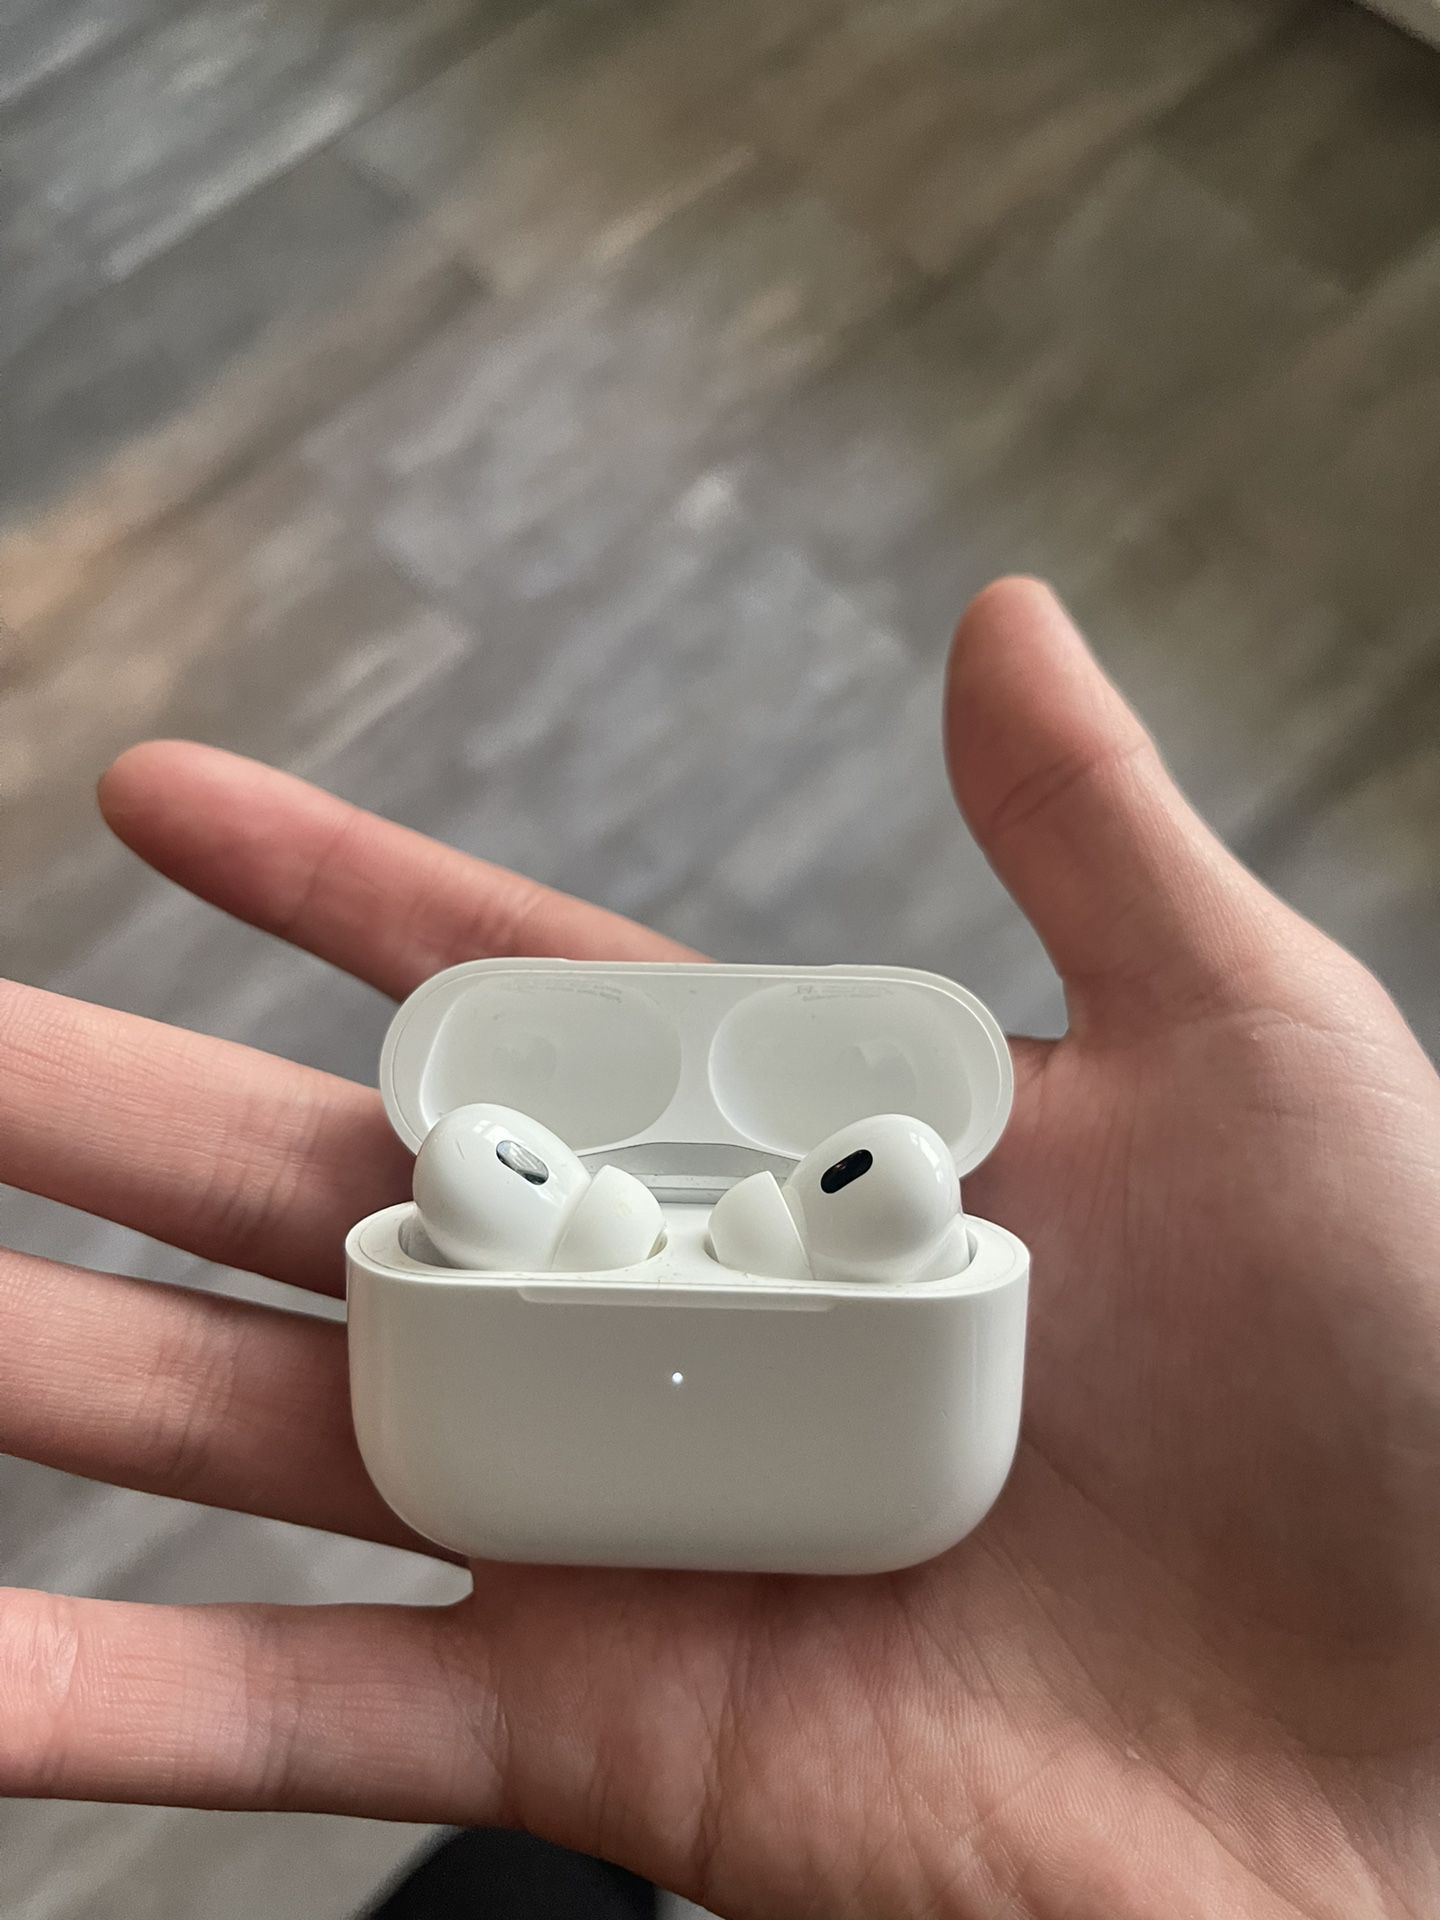 brand new airpods pro 1st generation 